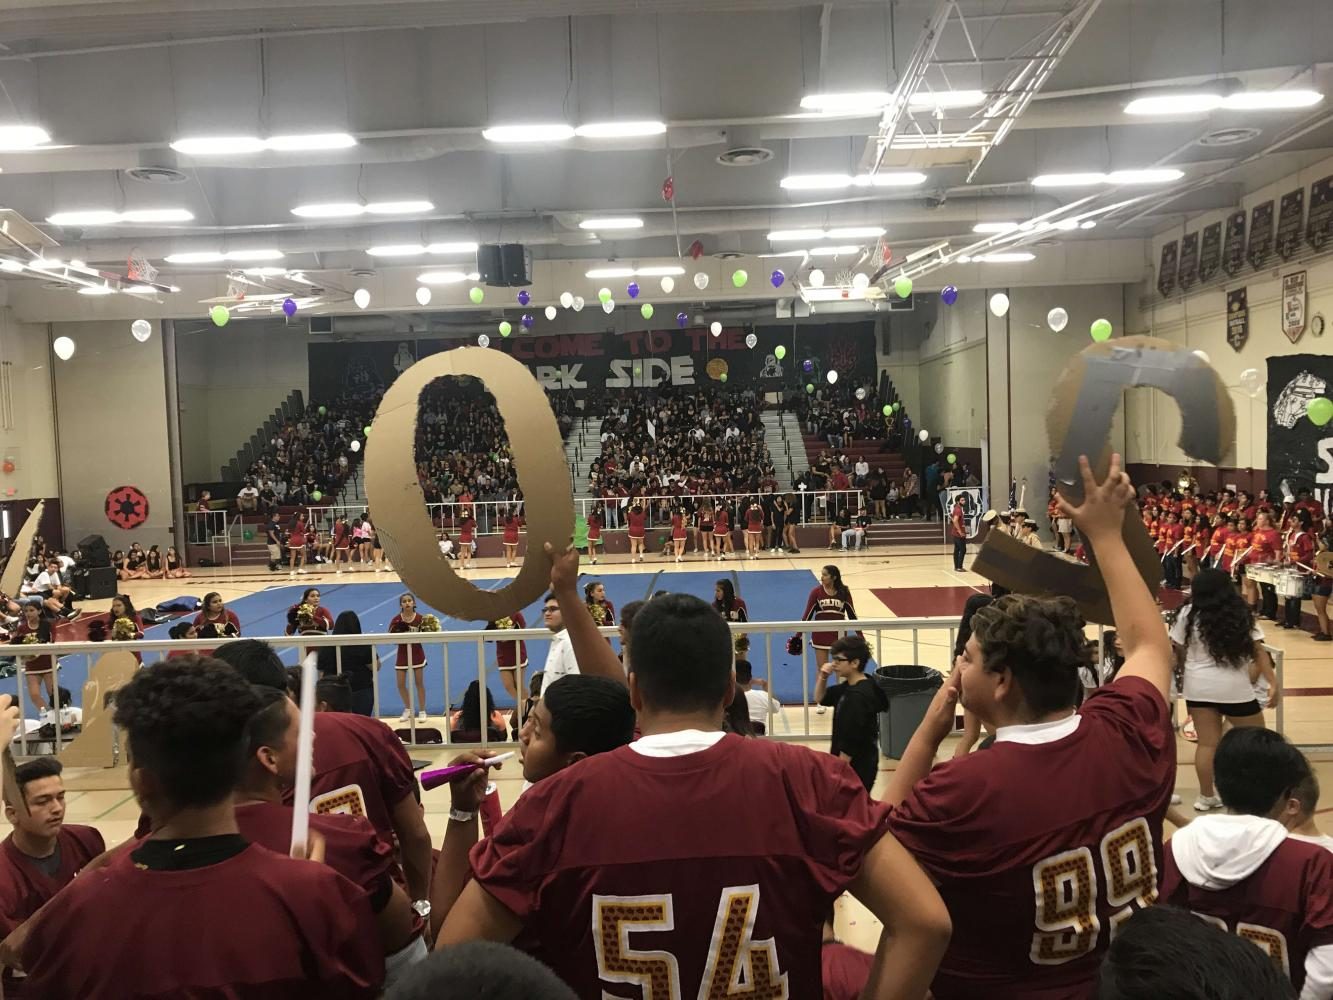 Pep rallies are a Colton High School tradition. This photo is from 2017.